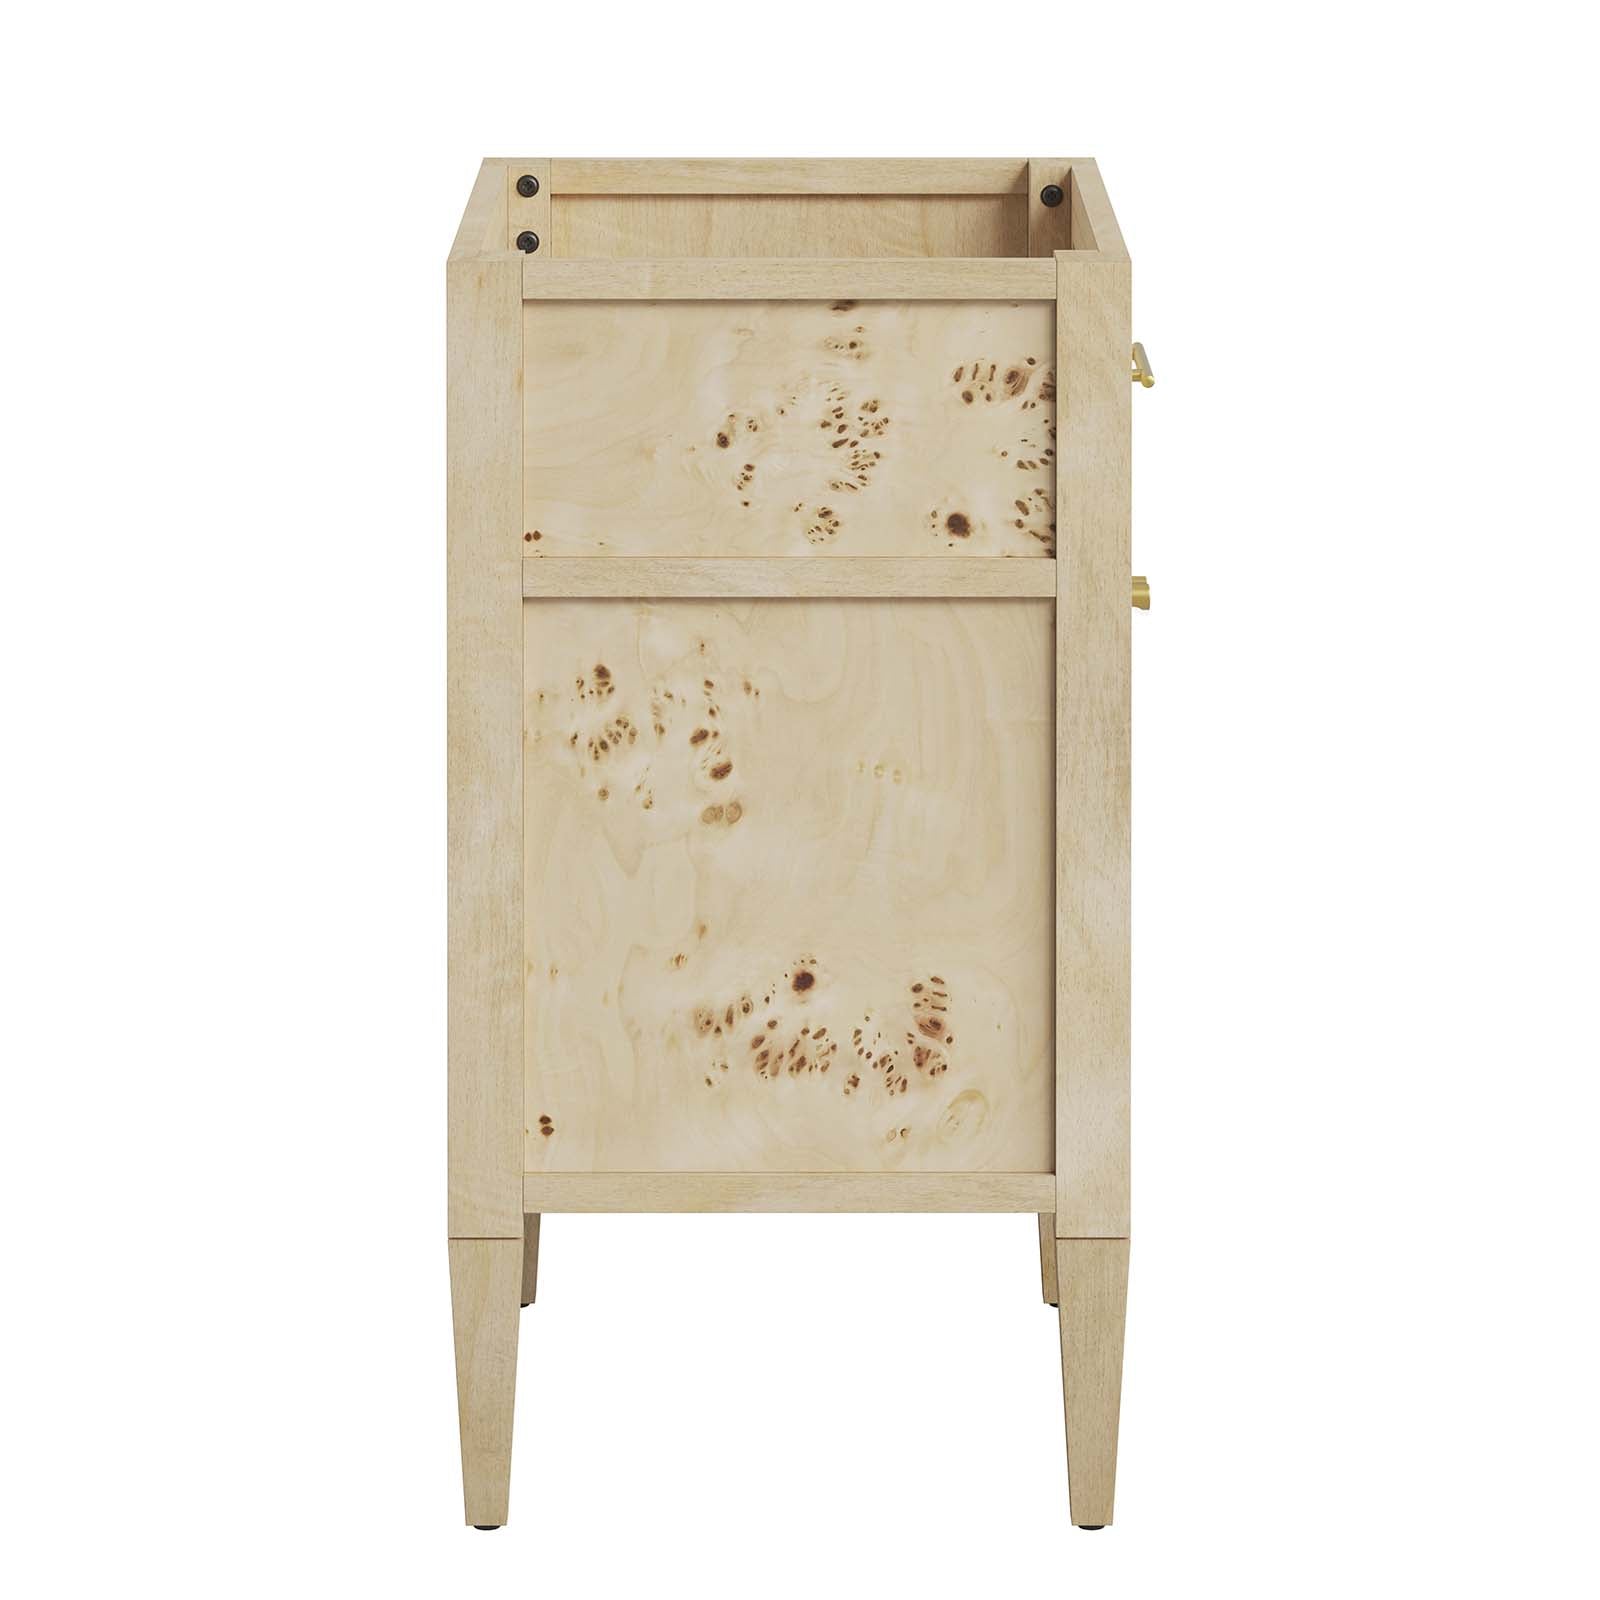 Elysian 24" Wood Bathroom Vanity Cabinet (Sink Basin Not Included) By Modway - EEI-6137 | Bathroom Accessories | Modway - 12